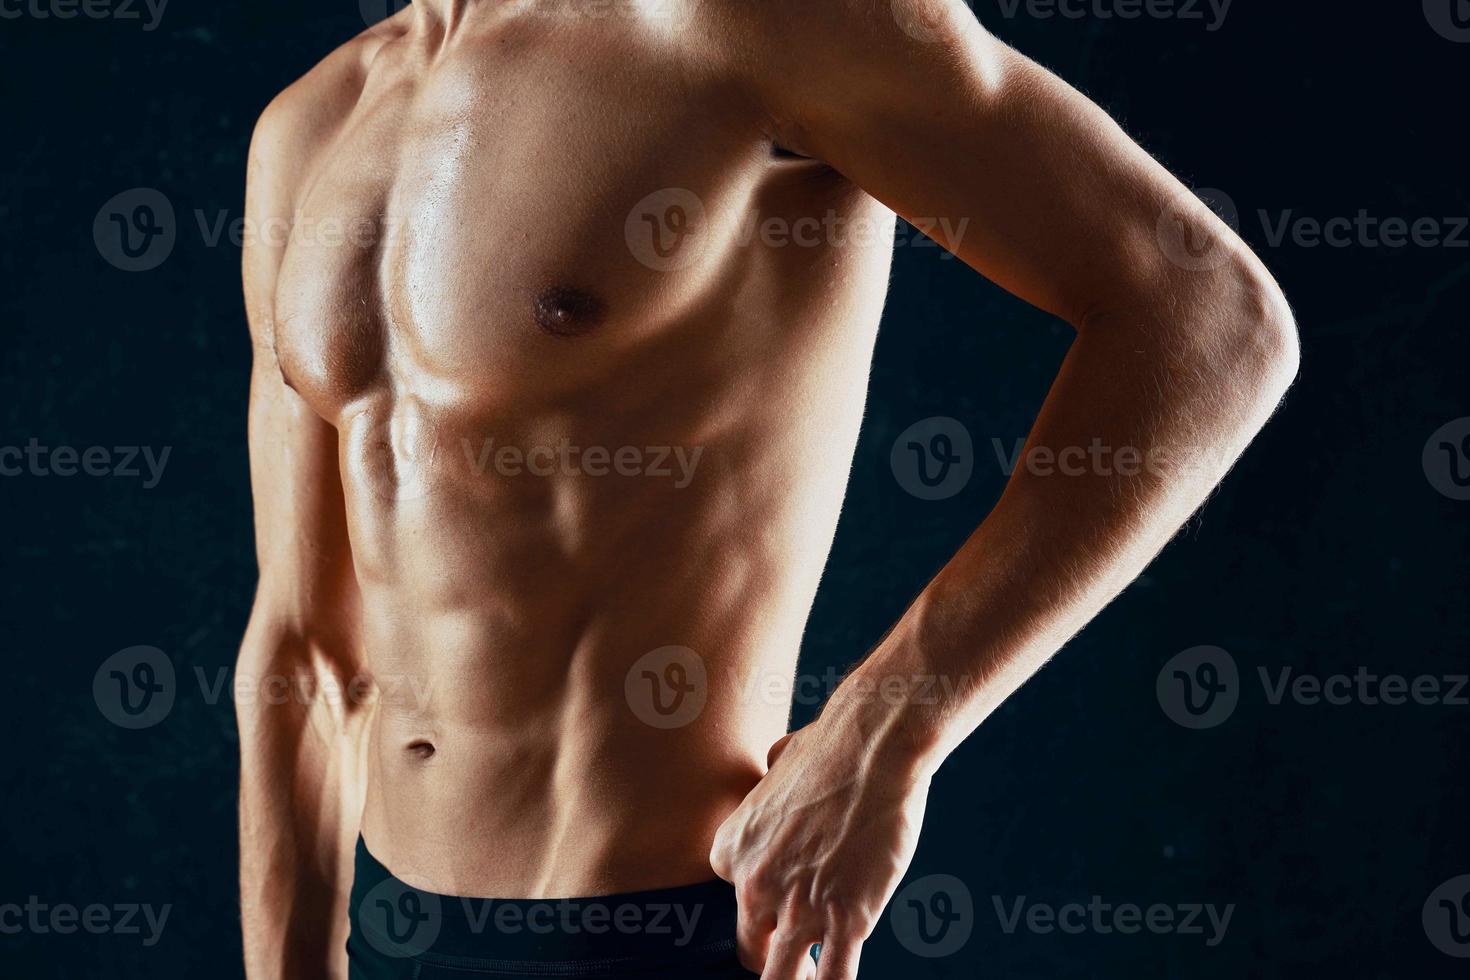 sporty man with a pumped-up muscular body in a towel dark background photo